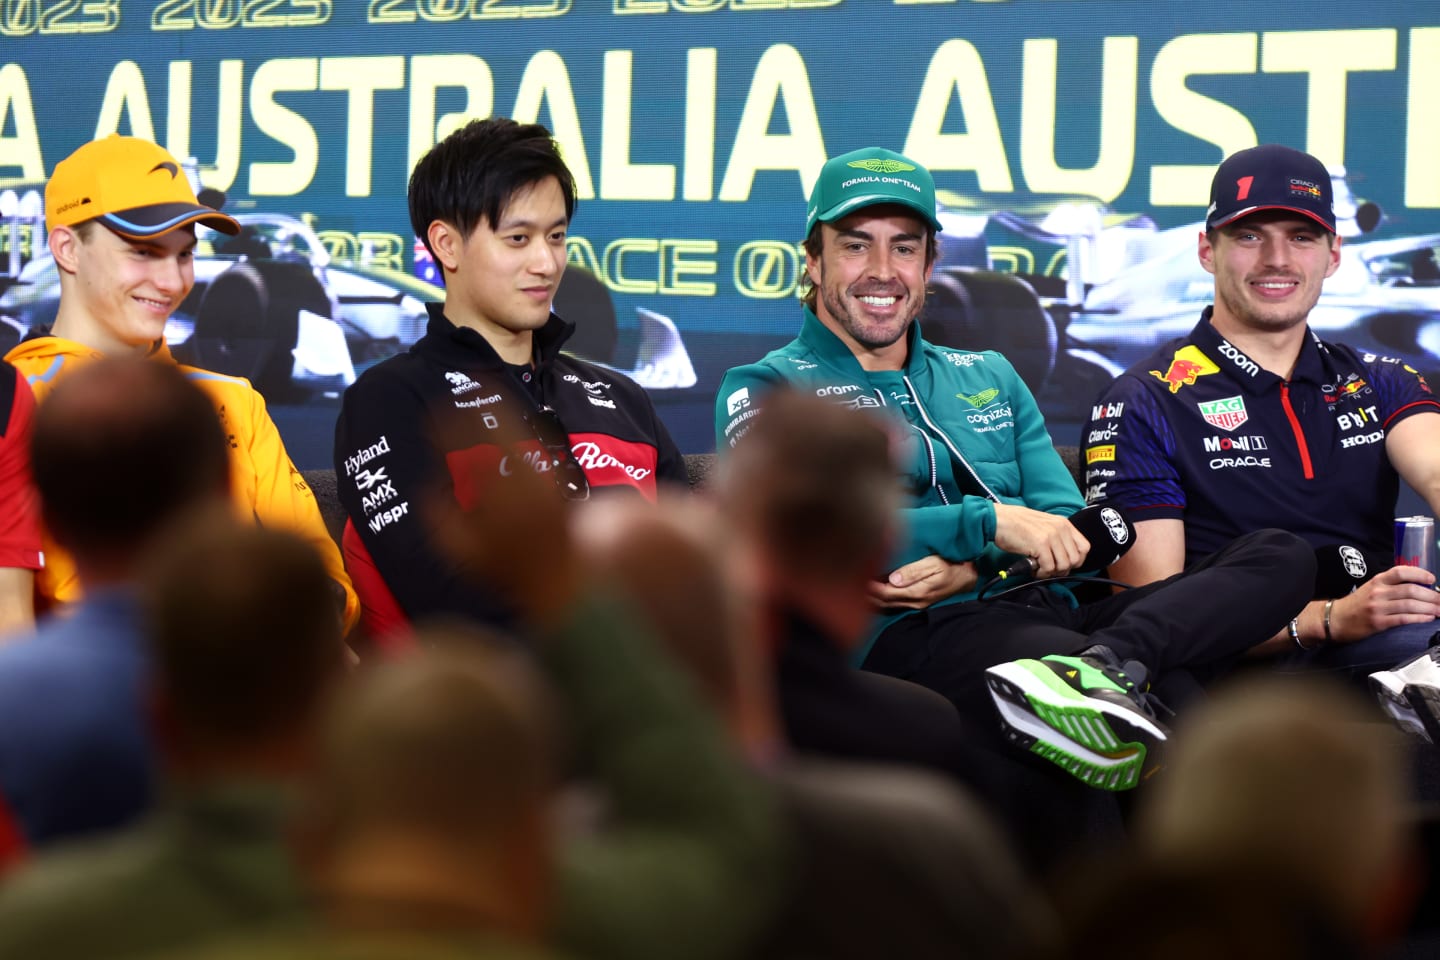 MELBOURNE, AUSTRALIA - MARCH 30: Fernando Alonso of Spain and Aston Martin F1 Team looks on in the Drivers Press Conference with Oscar Piastri of Australia and McLaren, Zhou Guanyu of China and Alfa Romeo F1 and Max Verstappen of the Netherlands and Oracle Red Bull Racing during previews ahead of the F1 Grand Prix of Australia at Albert Park Grand Prix Circuit on March 30, 2023 in Melbourne, Australia. (Photo by Dan Istitene/Getty Images)